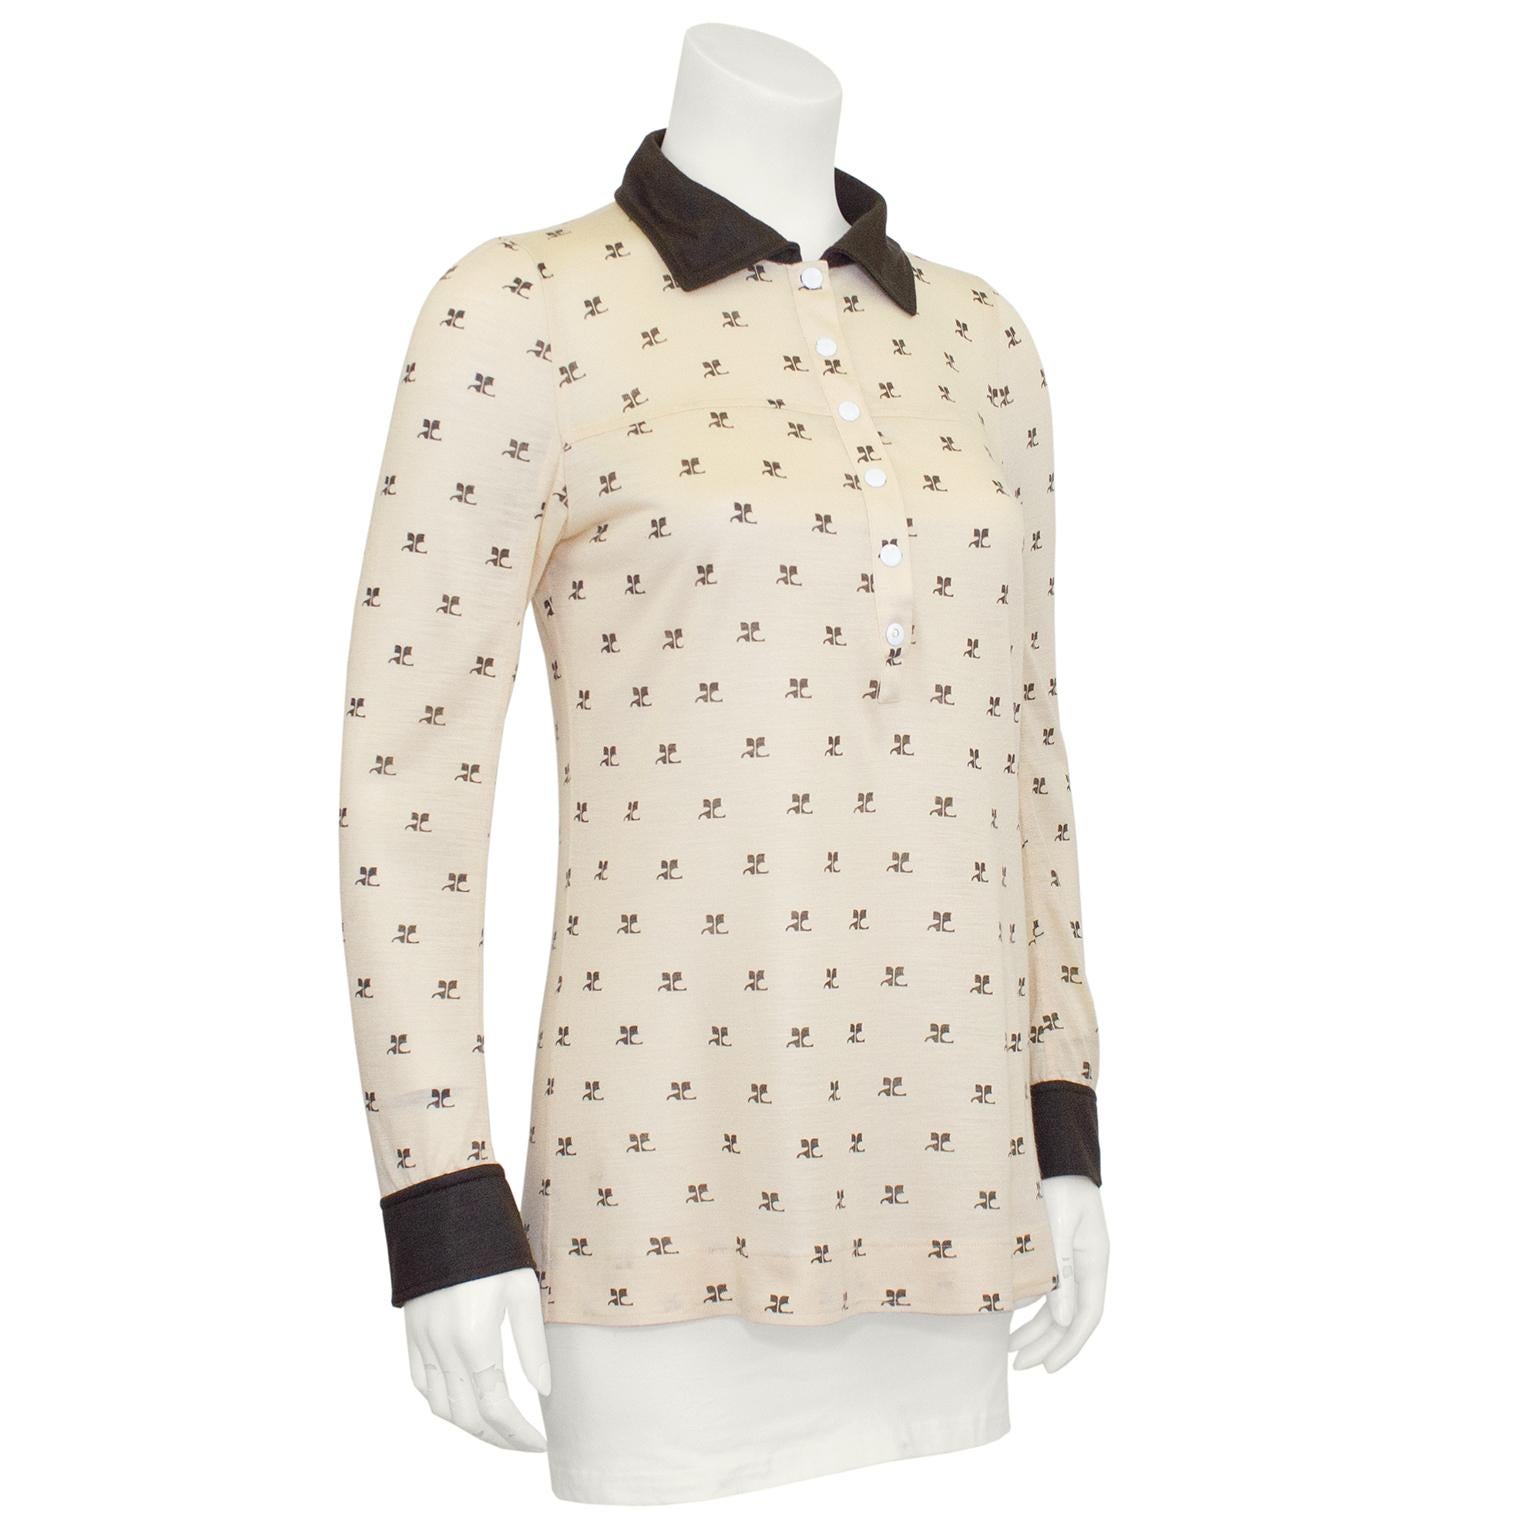 Join the logo mania trend with this very cute Courreges long sleeve henley from the 1970s. Beige cotton chocolate brown Courreges logos and chocolate brown collar and cuffs. Contrasting white snap buttons at neckline and cuffs. Overall good vintage